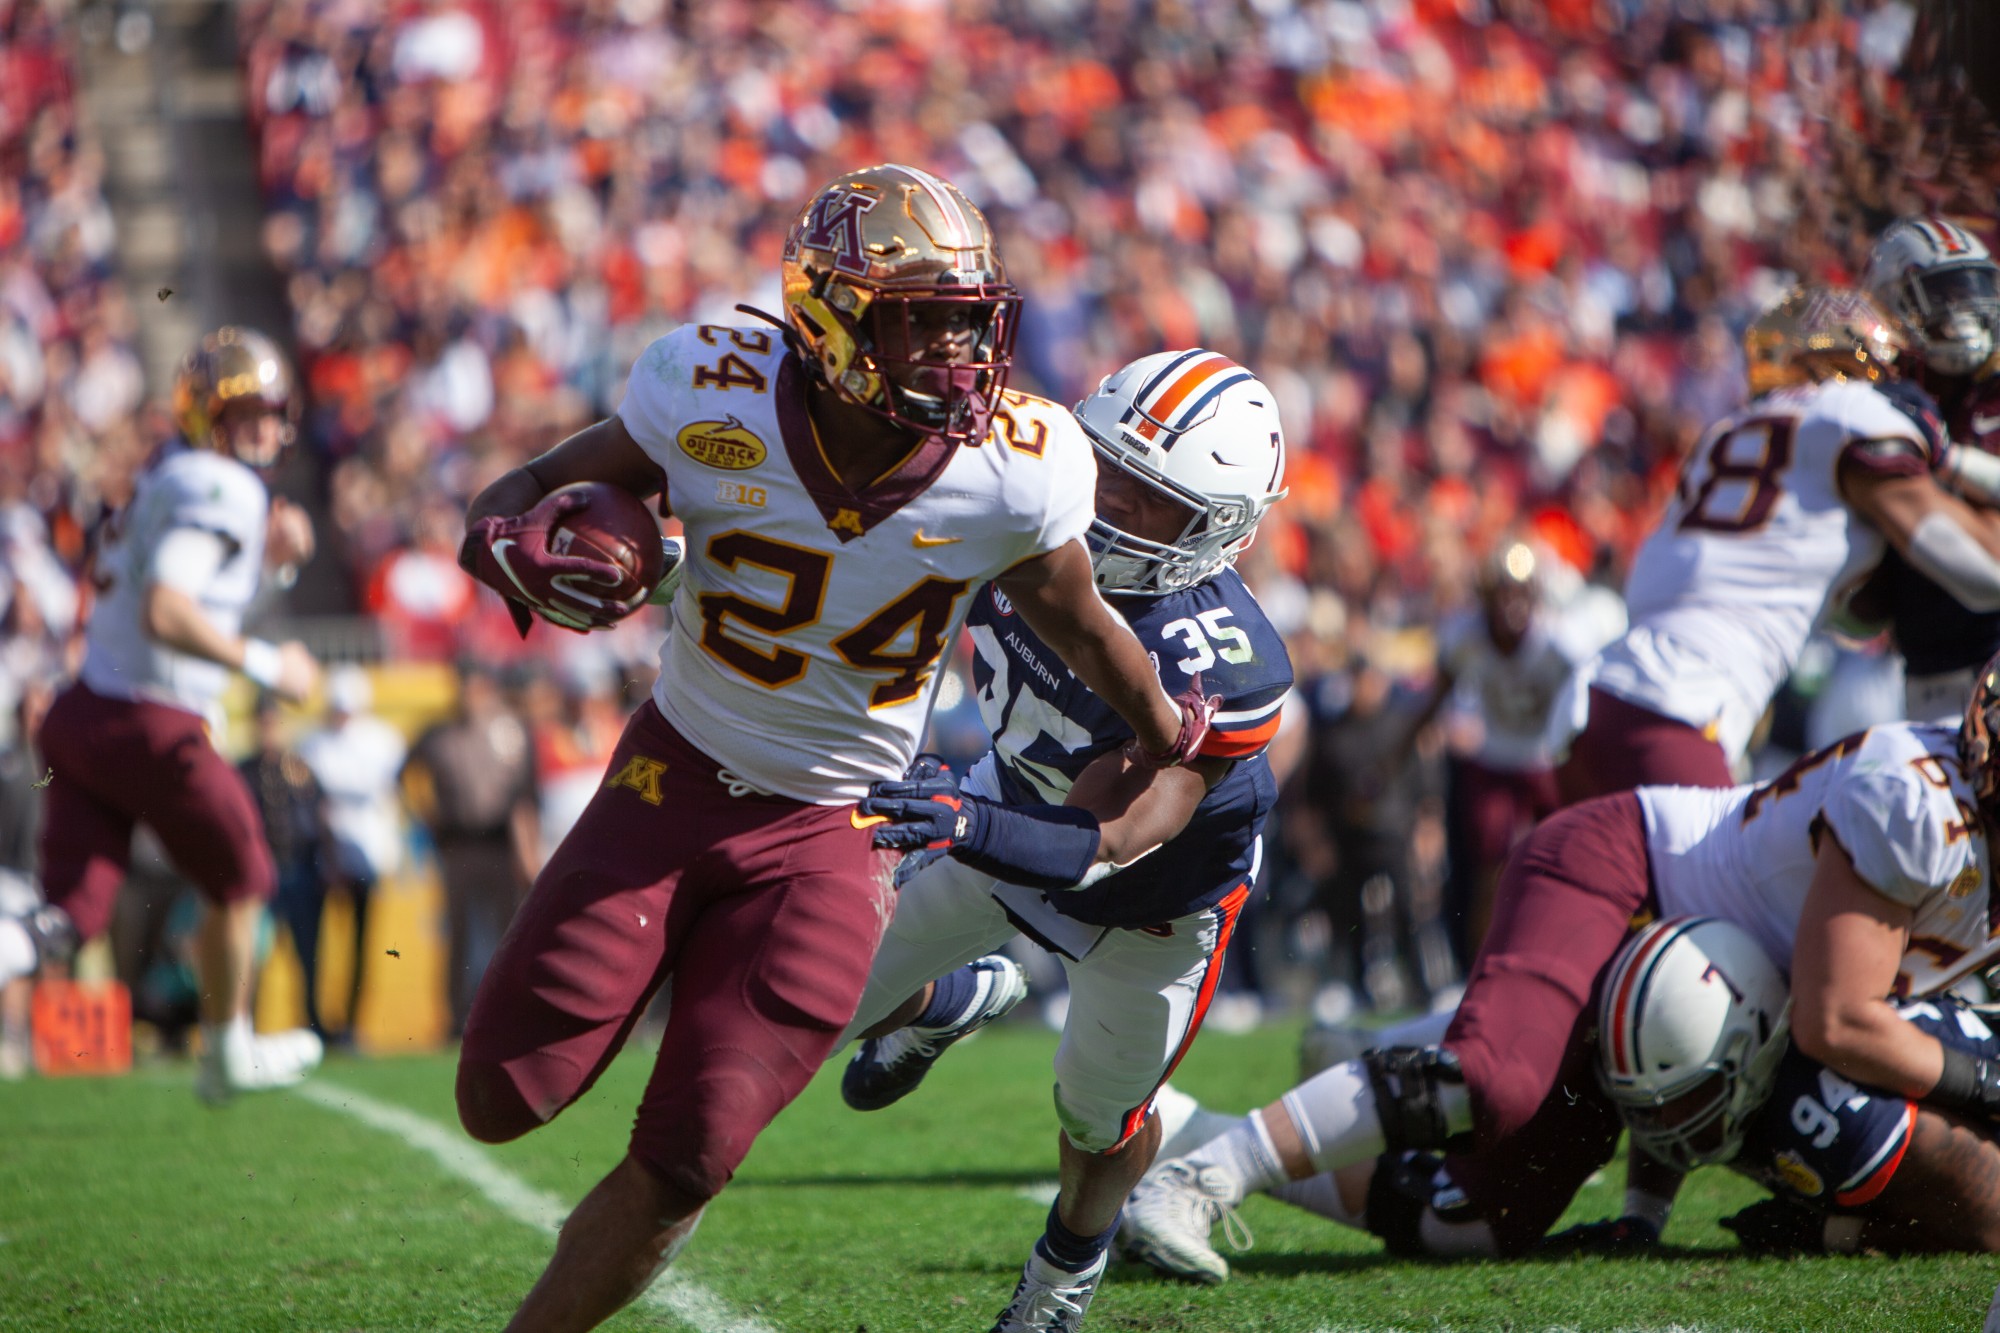 Gophers Runningback Mohamed Ibrahim carries the ball at Raymond James Stadium in Tampa, Florida on Wednesday, Jan. 1. Minnesota holds a 24-17 lead over Auburn heading into the third quarter of the Outback Bowl. (Kamaan Richards / Minnesota Daily)